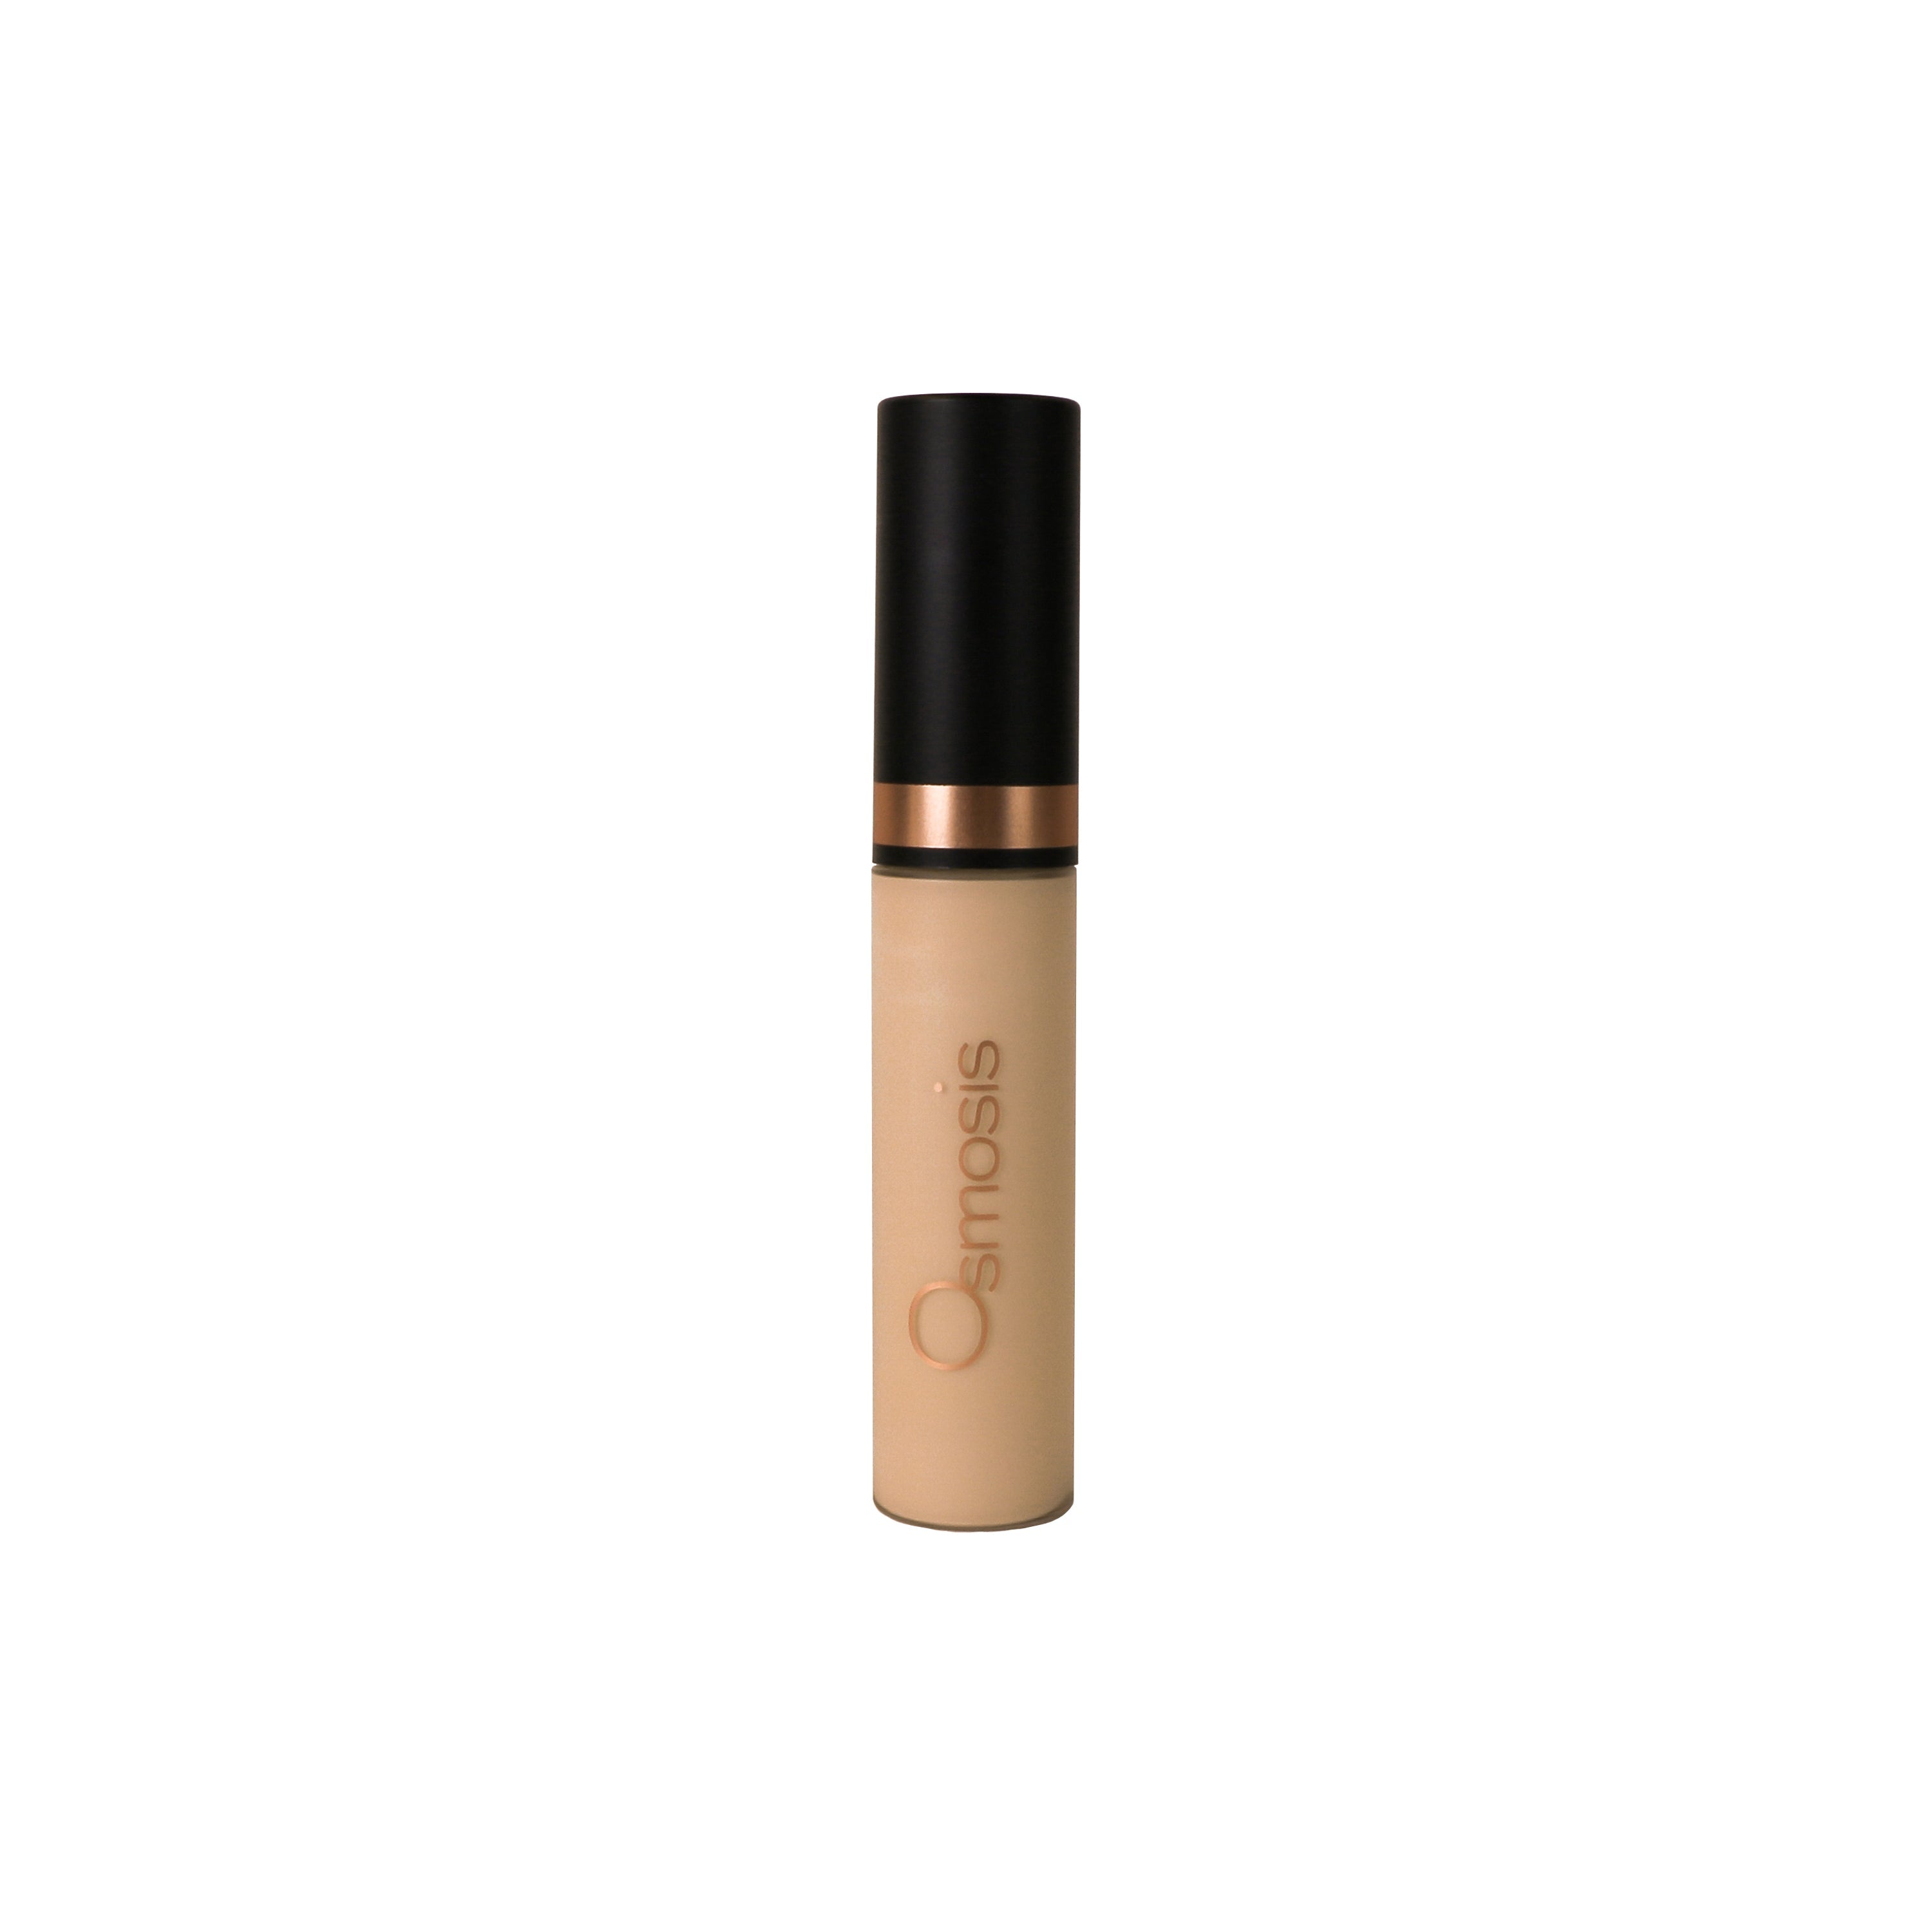 container standing up closed of buff flawless concealer on white background